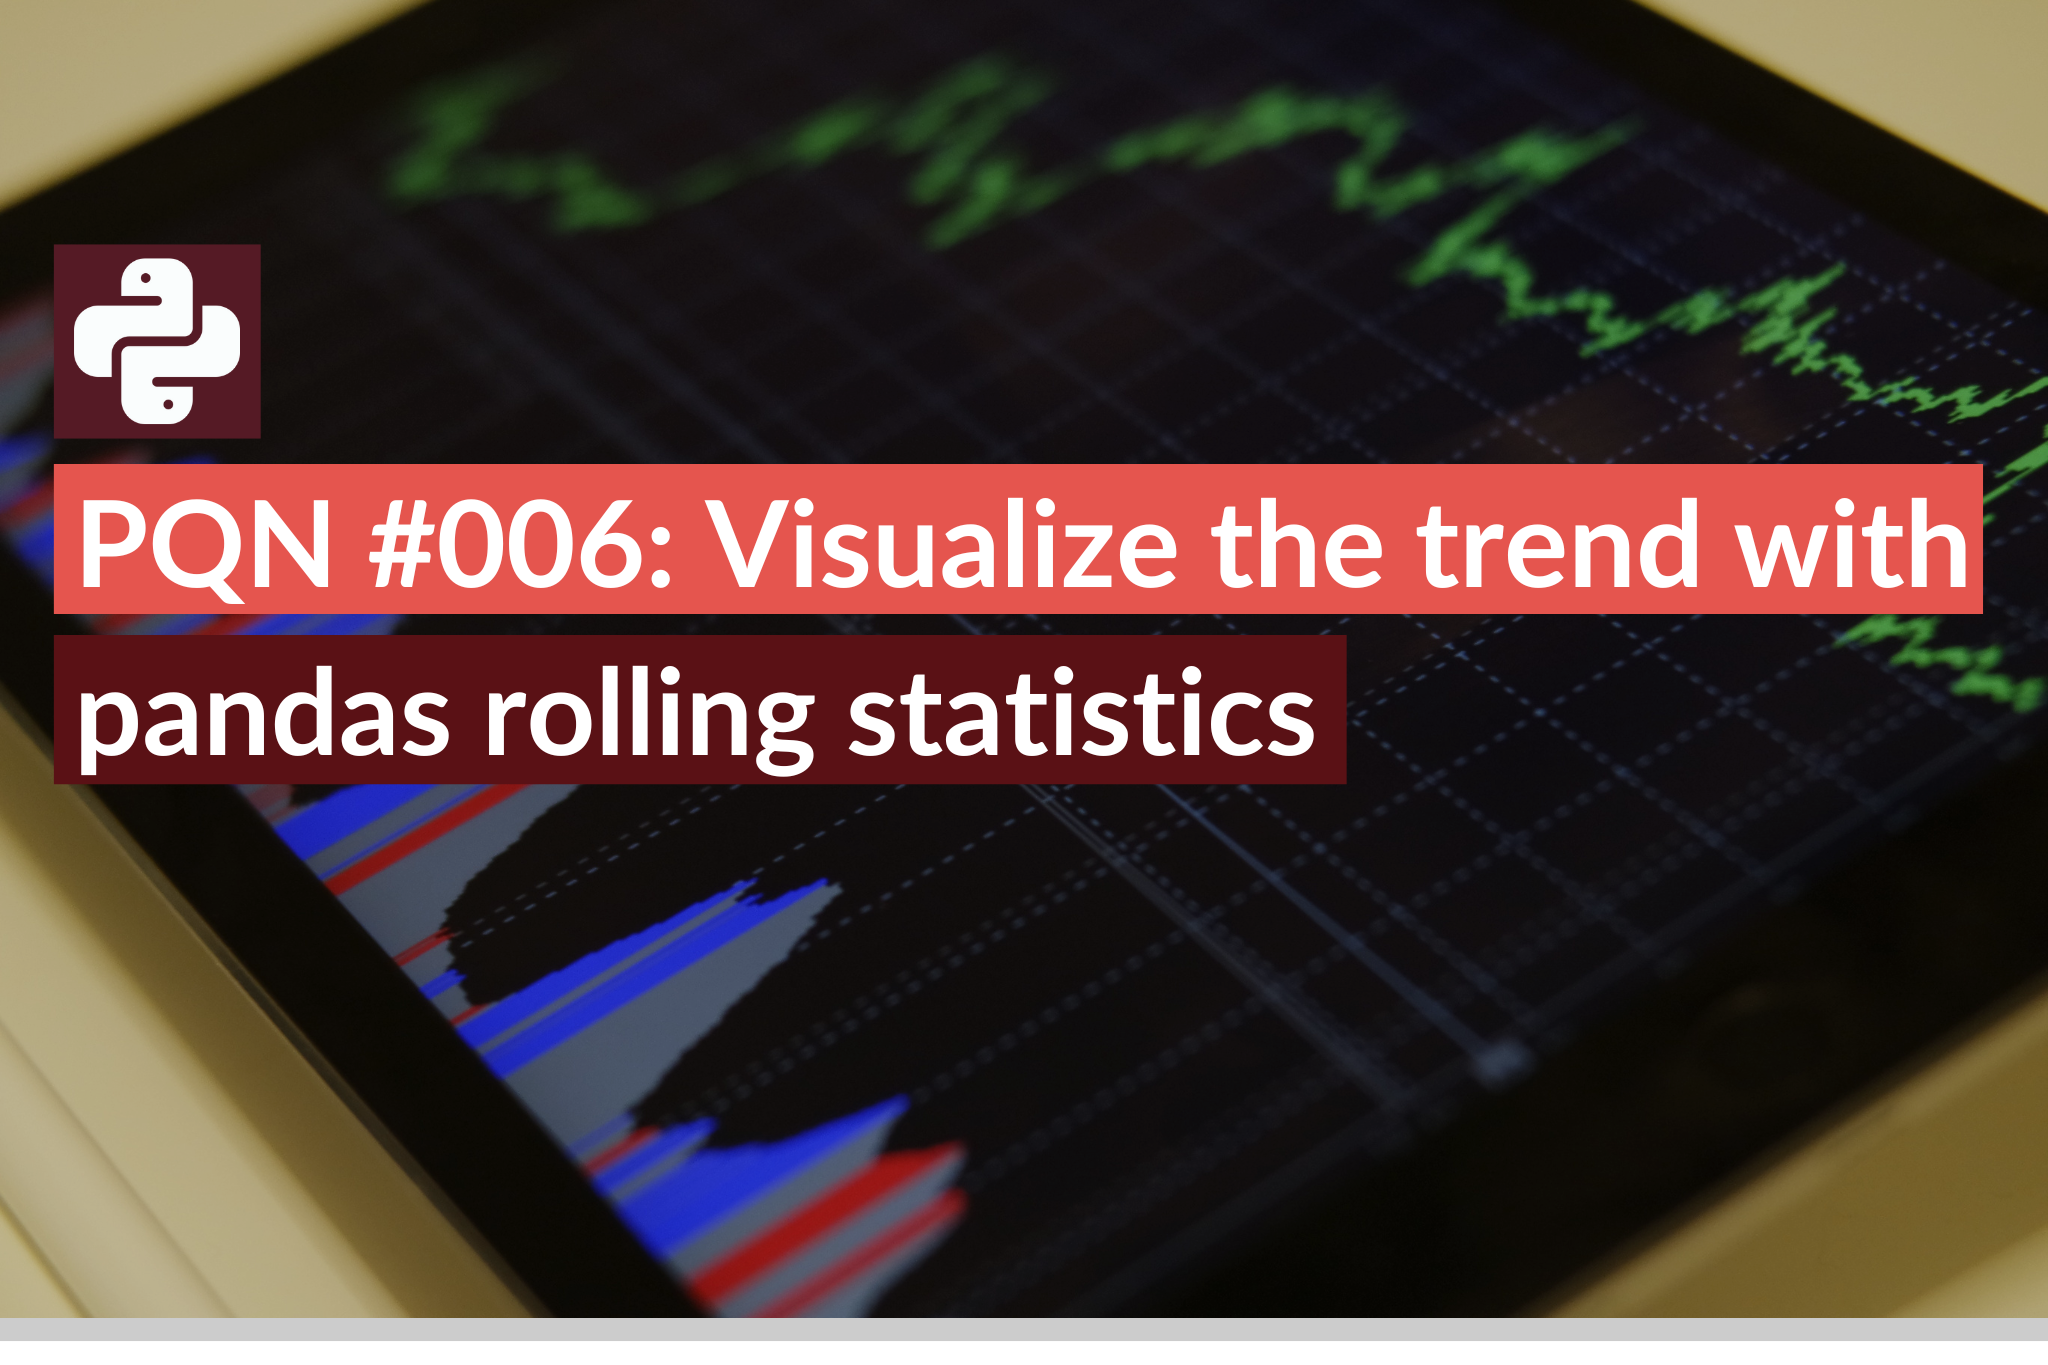 PQN #006 Visualize the trend with pandas rolling statistics